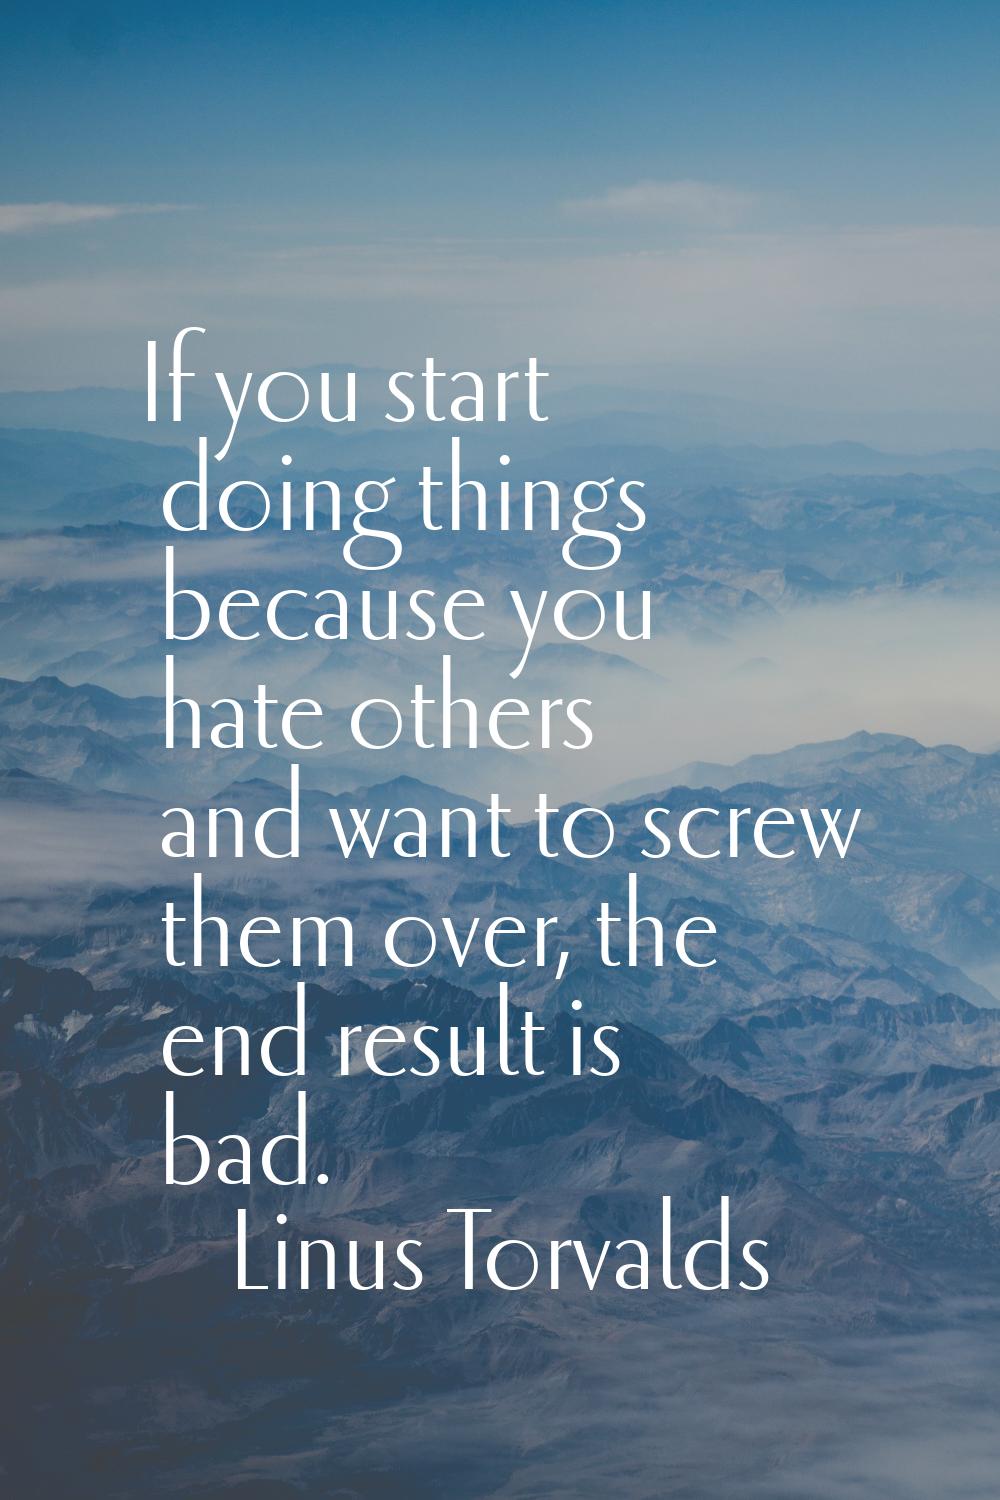 If you start doing things because you hate others and want to screw them over, the end result is ba